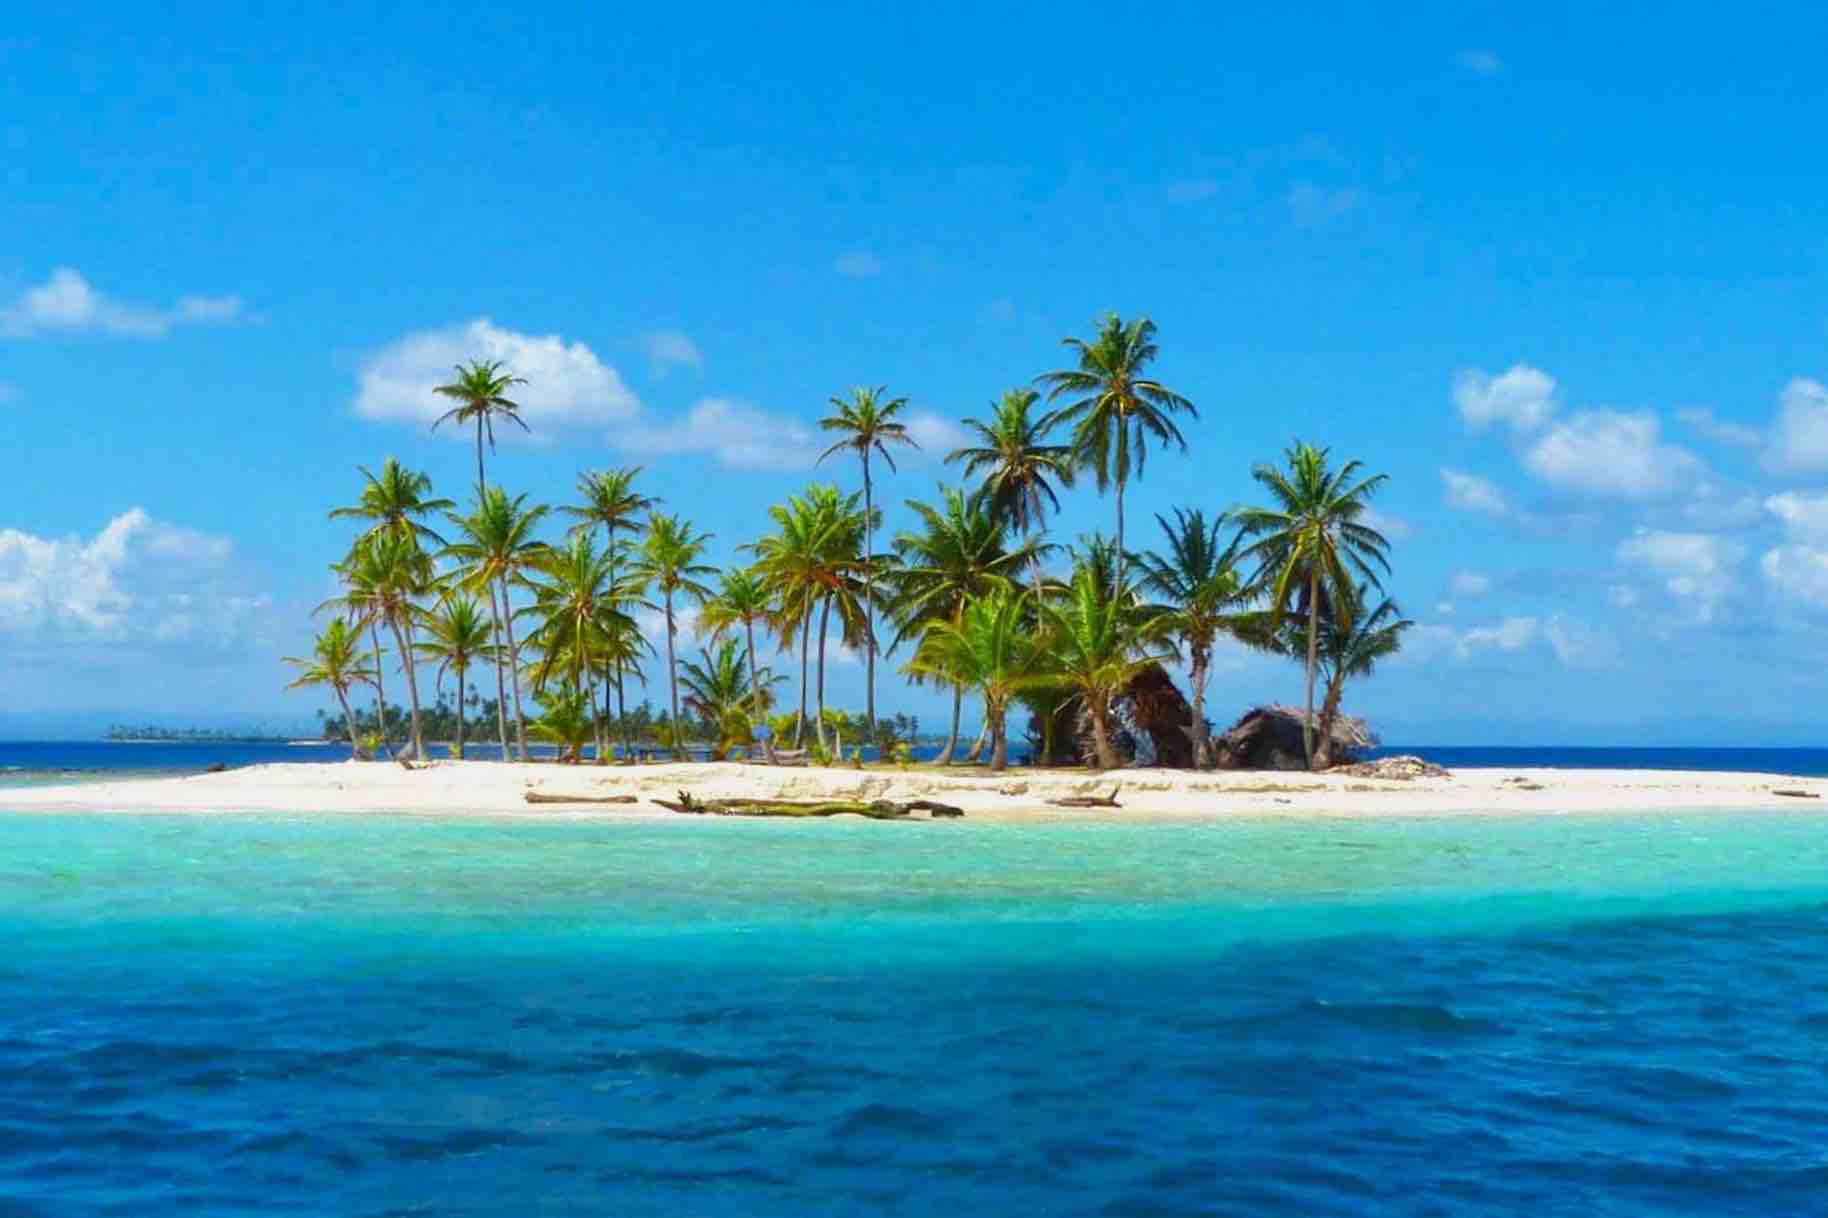 San Blas Day Tour - Freedom In The Islands | Tao Travel 365